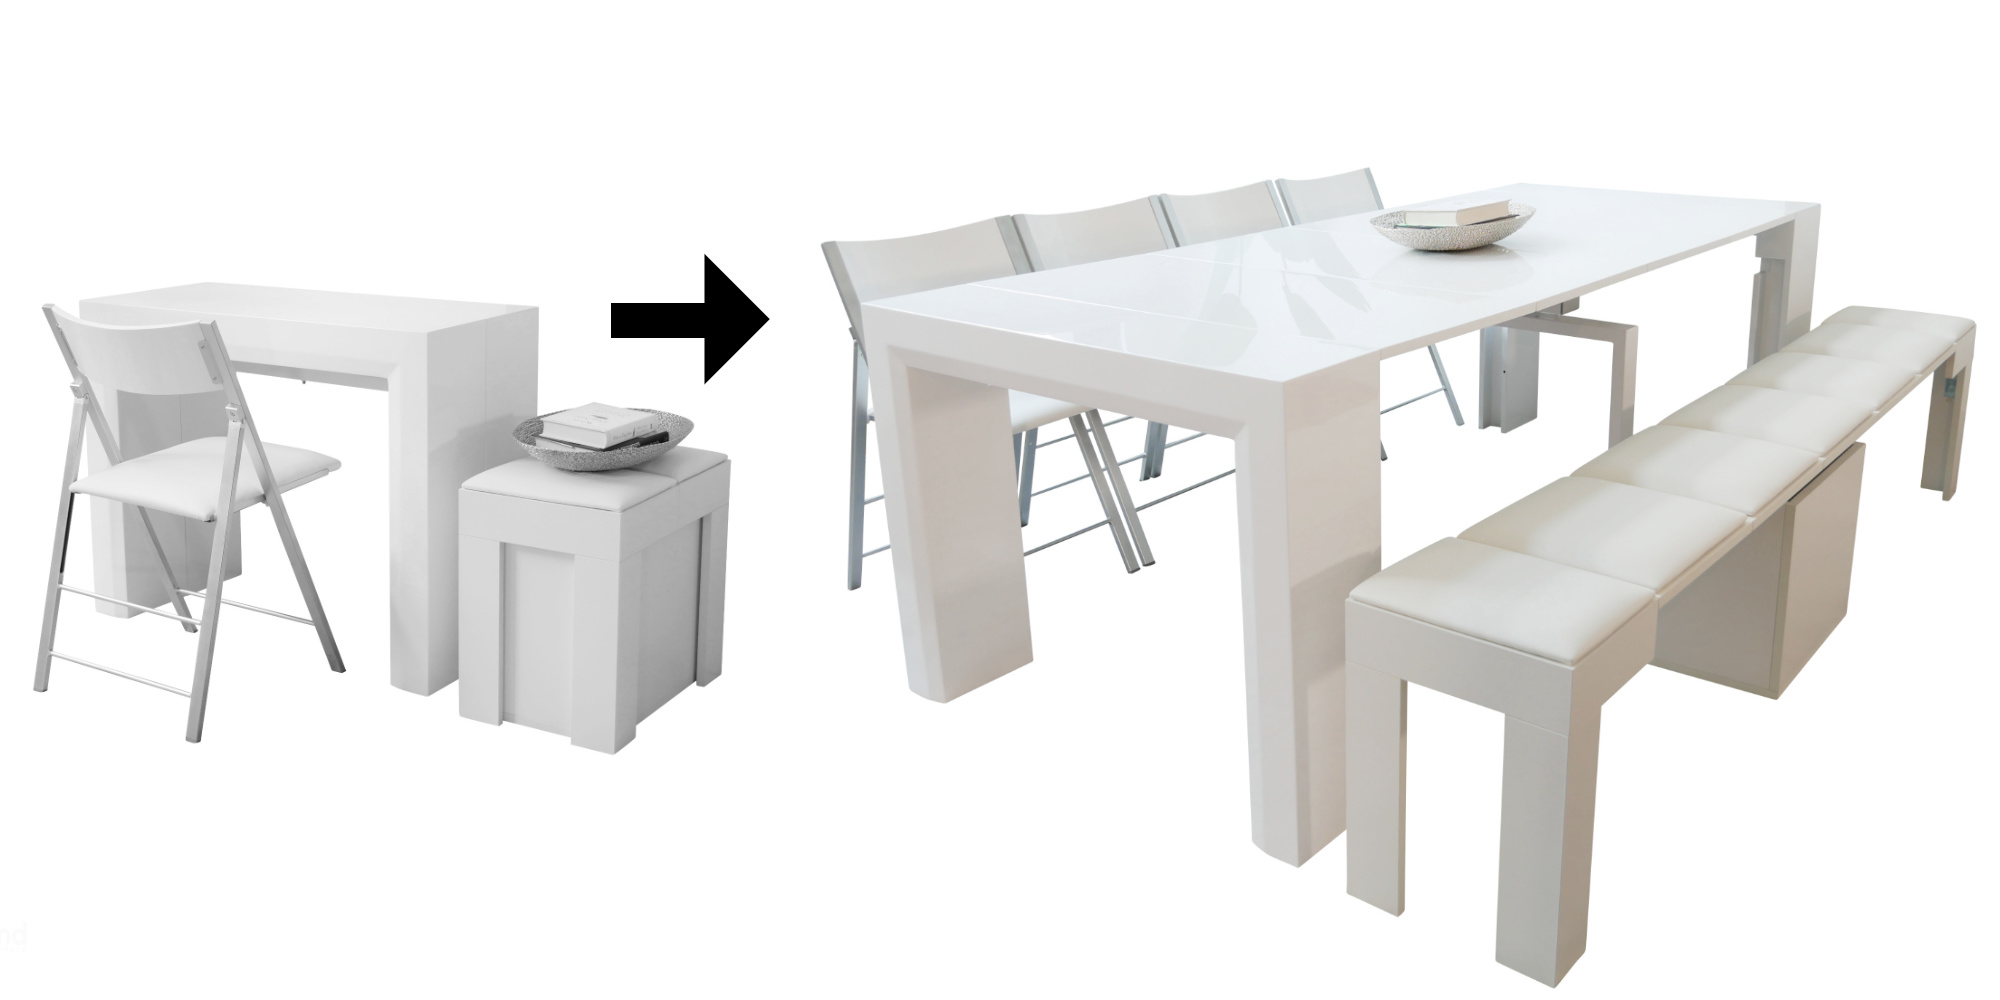 The ultimate space saving dining set deal with a junior giant extending console table and 4 nano chairs and a mini scatola